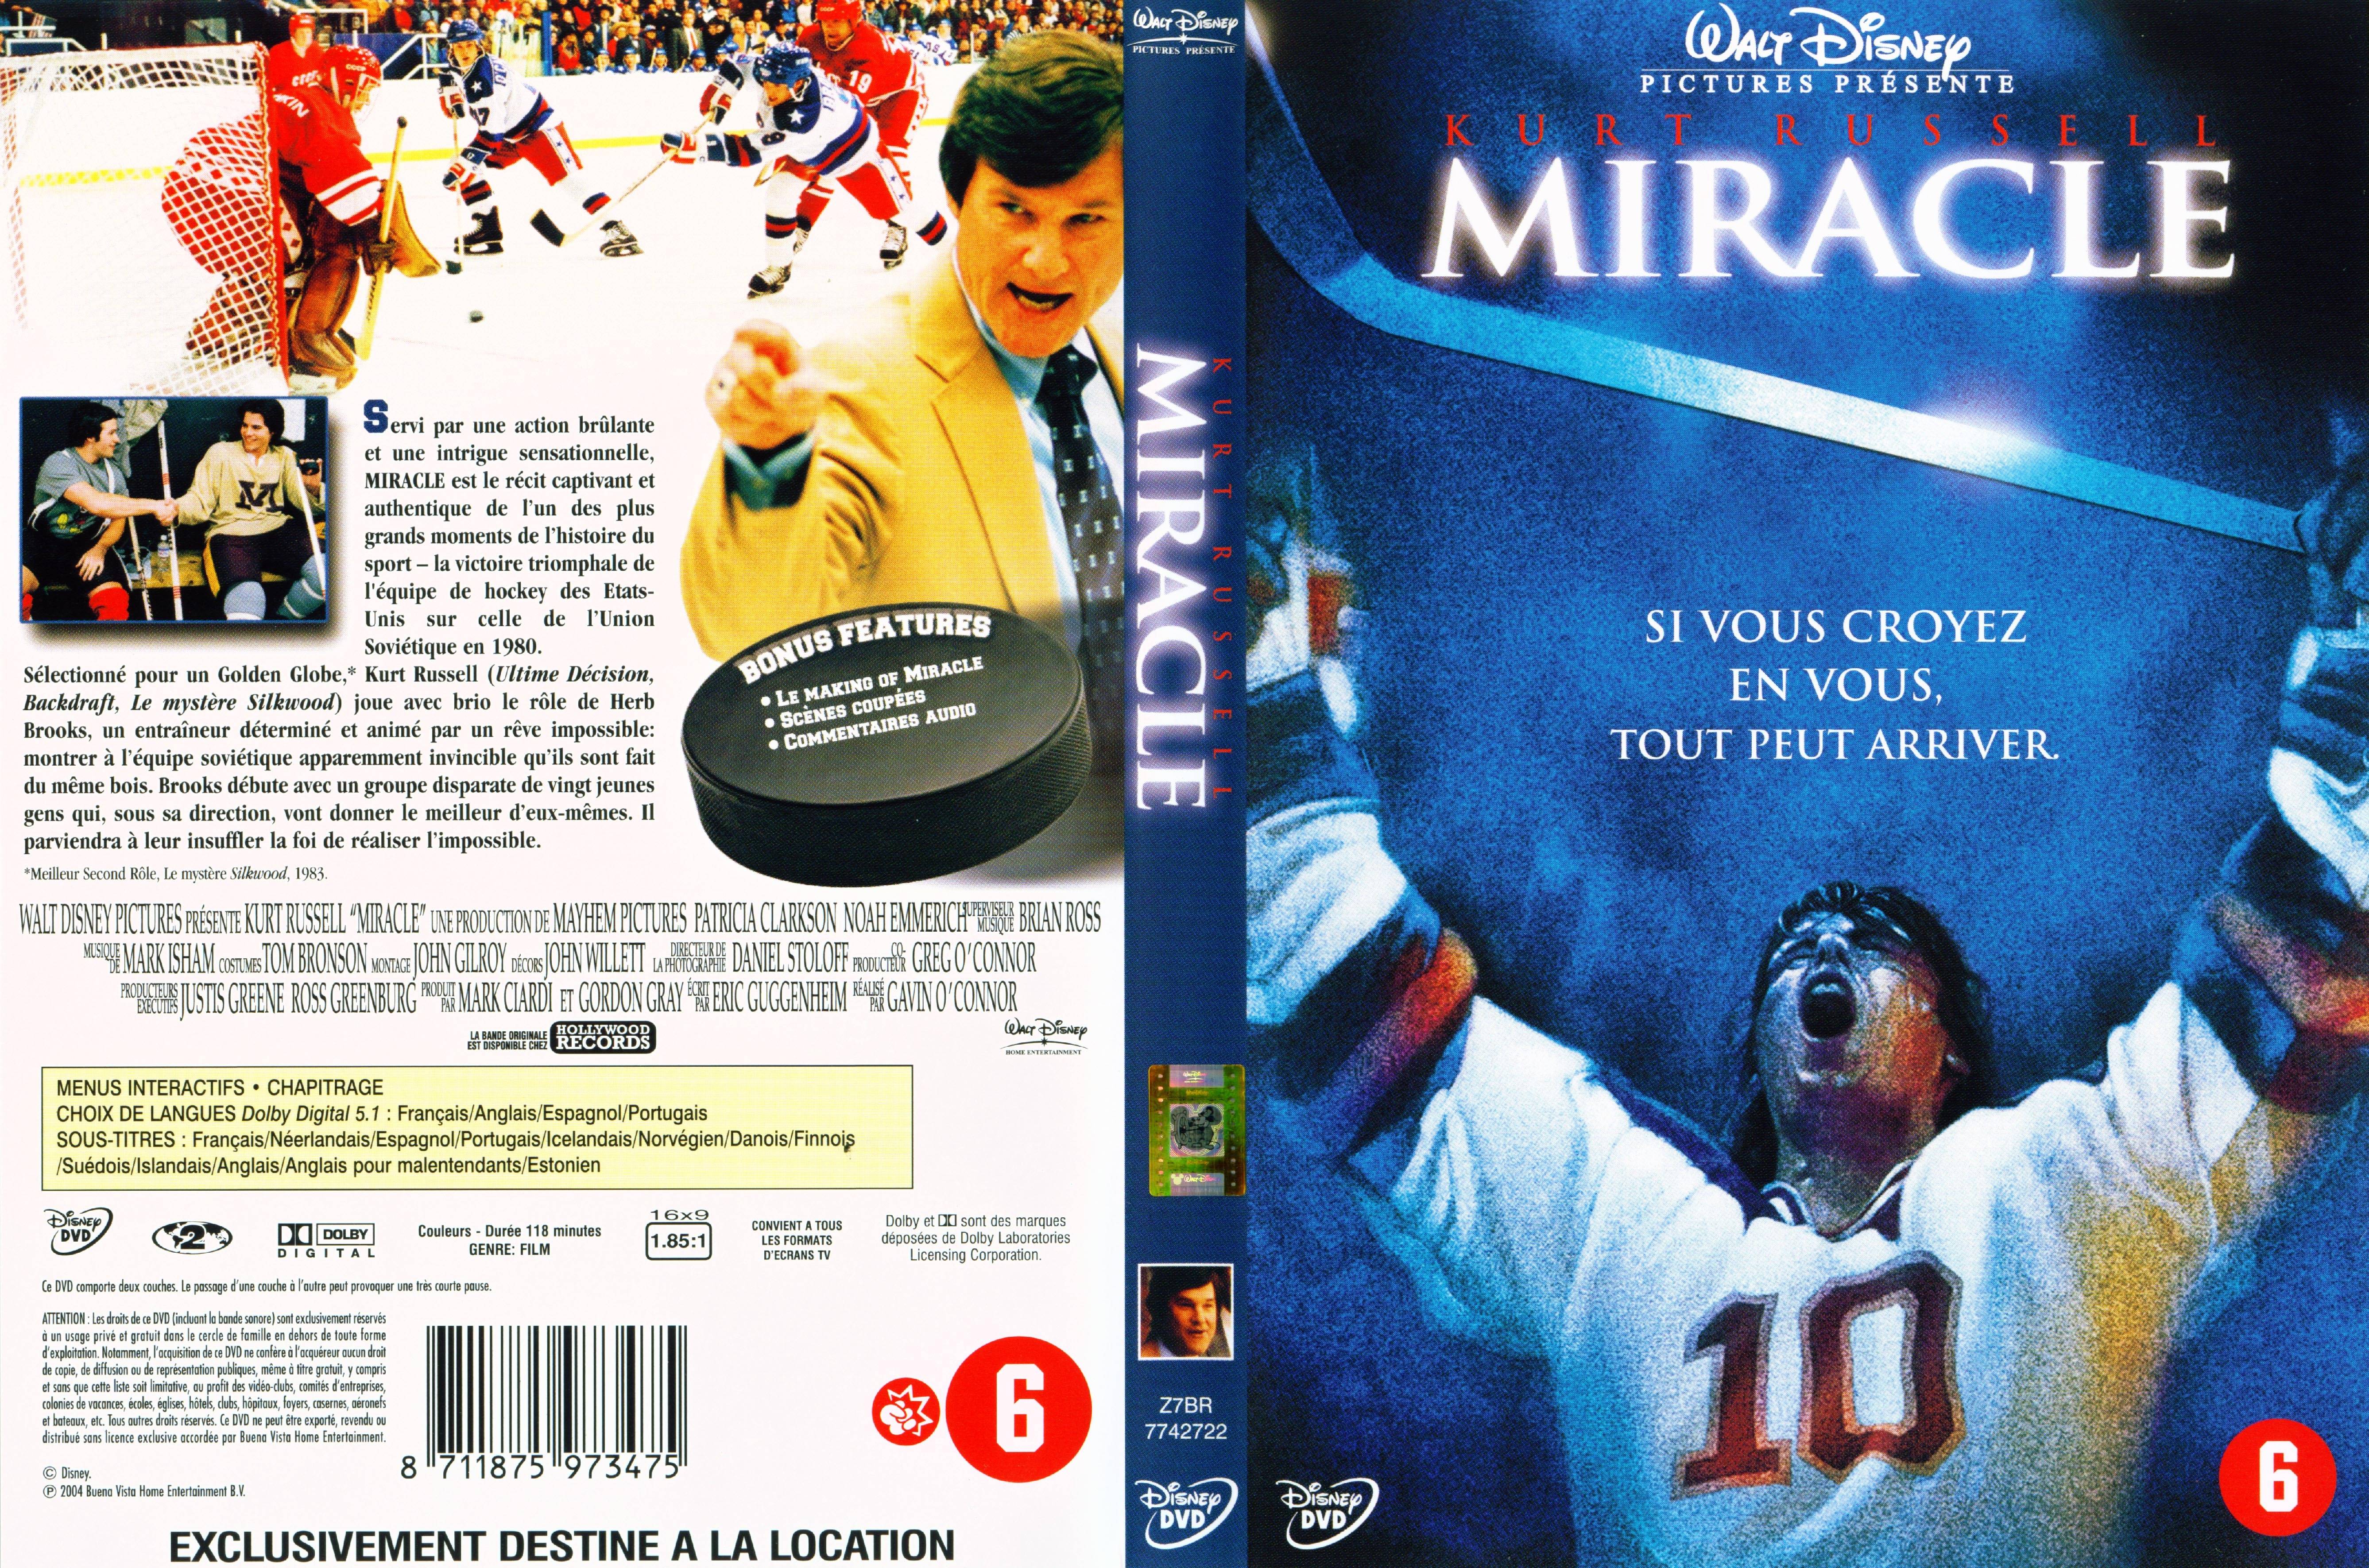 Jaquette DVD Miracle v2